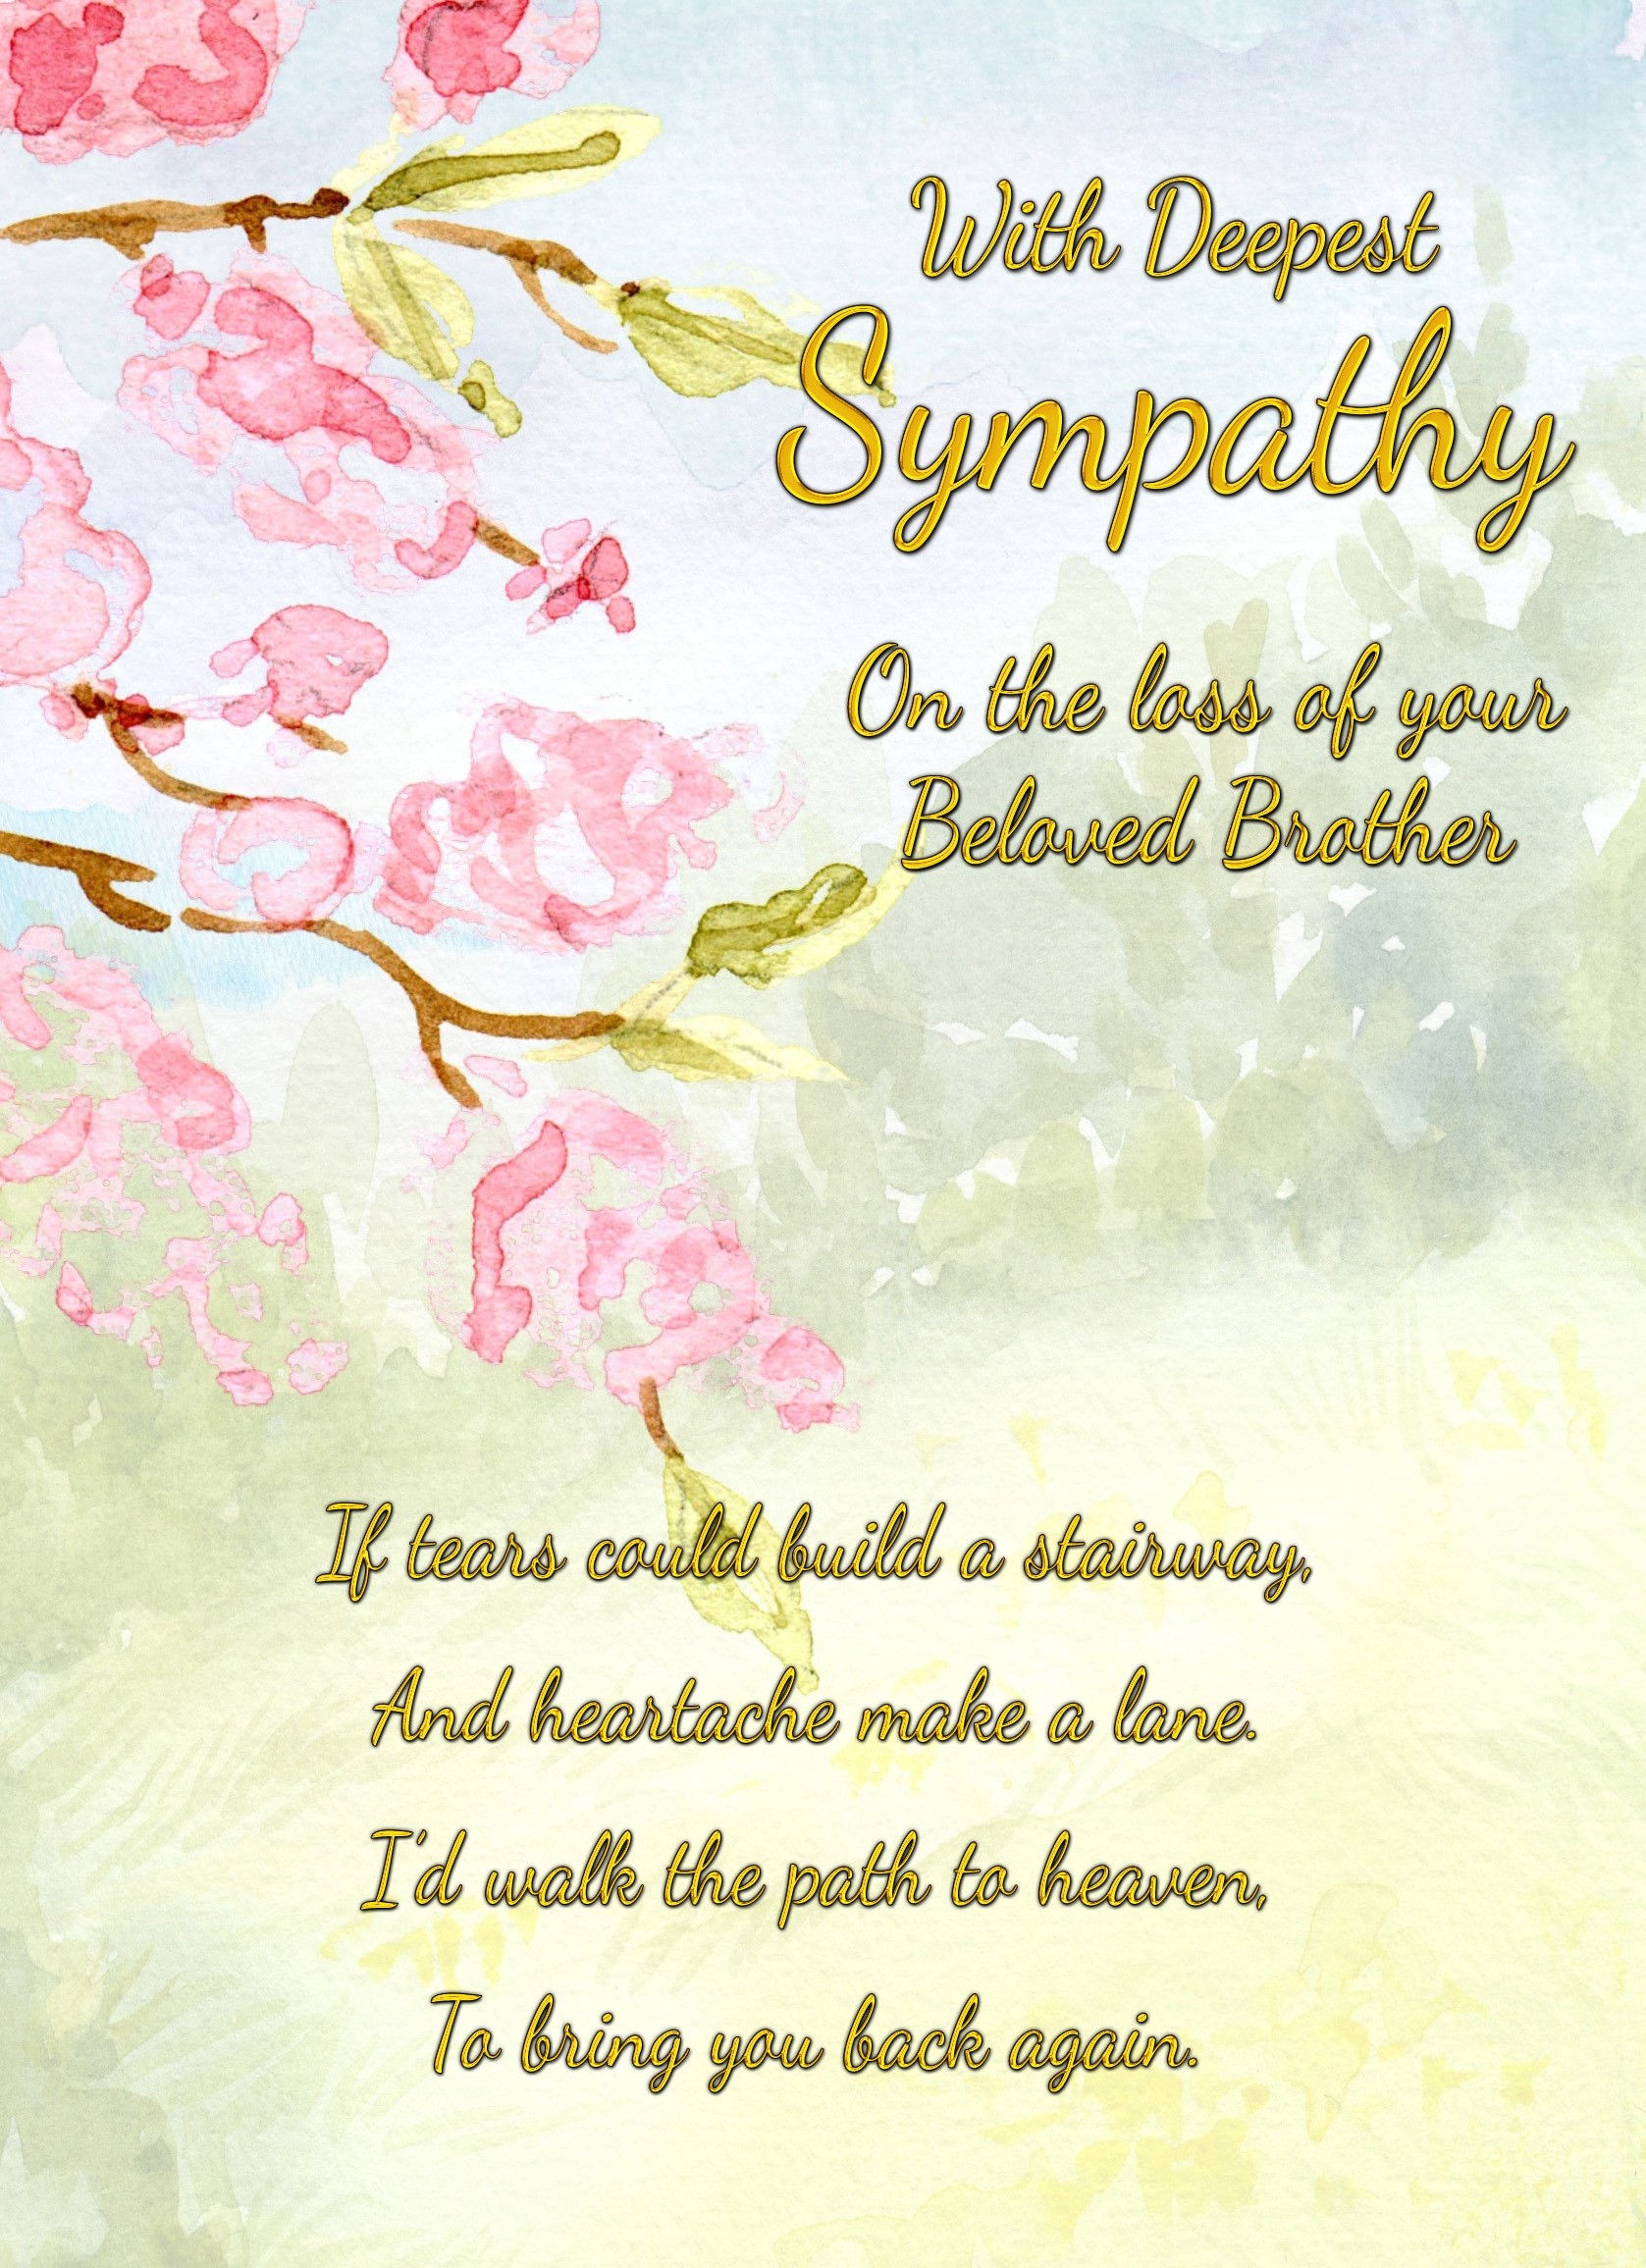 Sympathy Bereavement Card (With Deepest Sympathy, Beloved Brother)